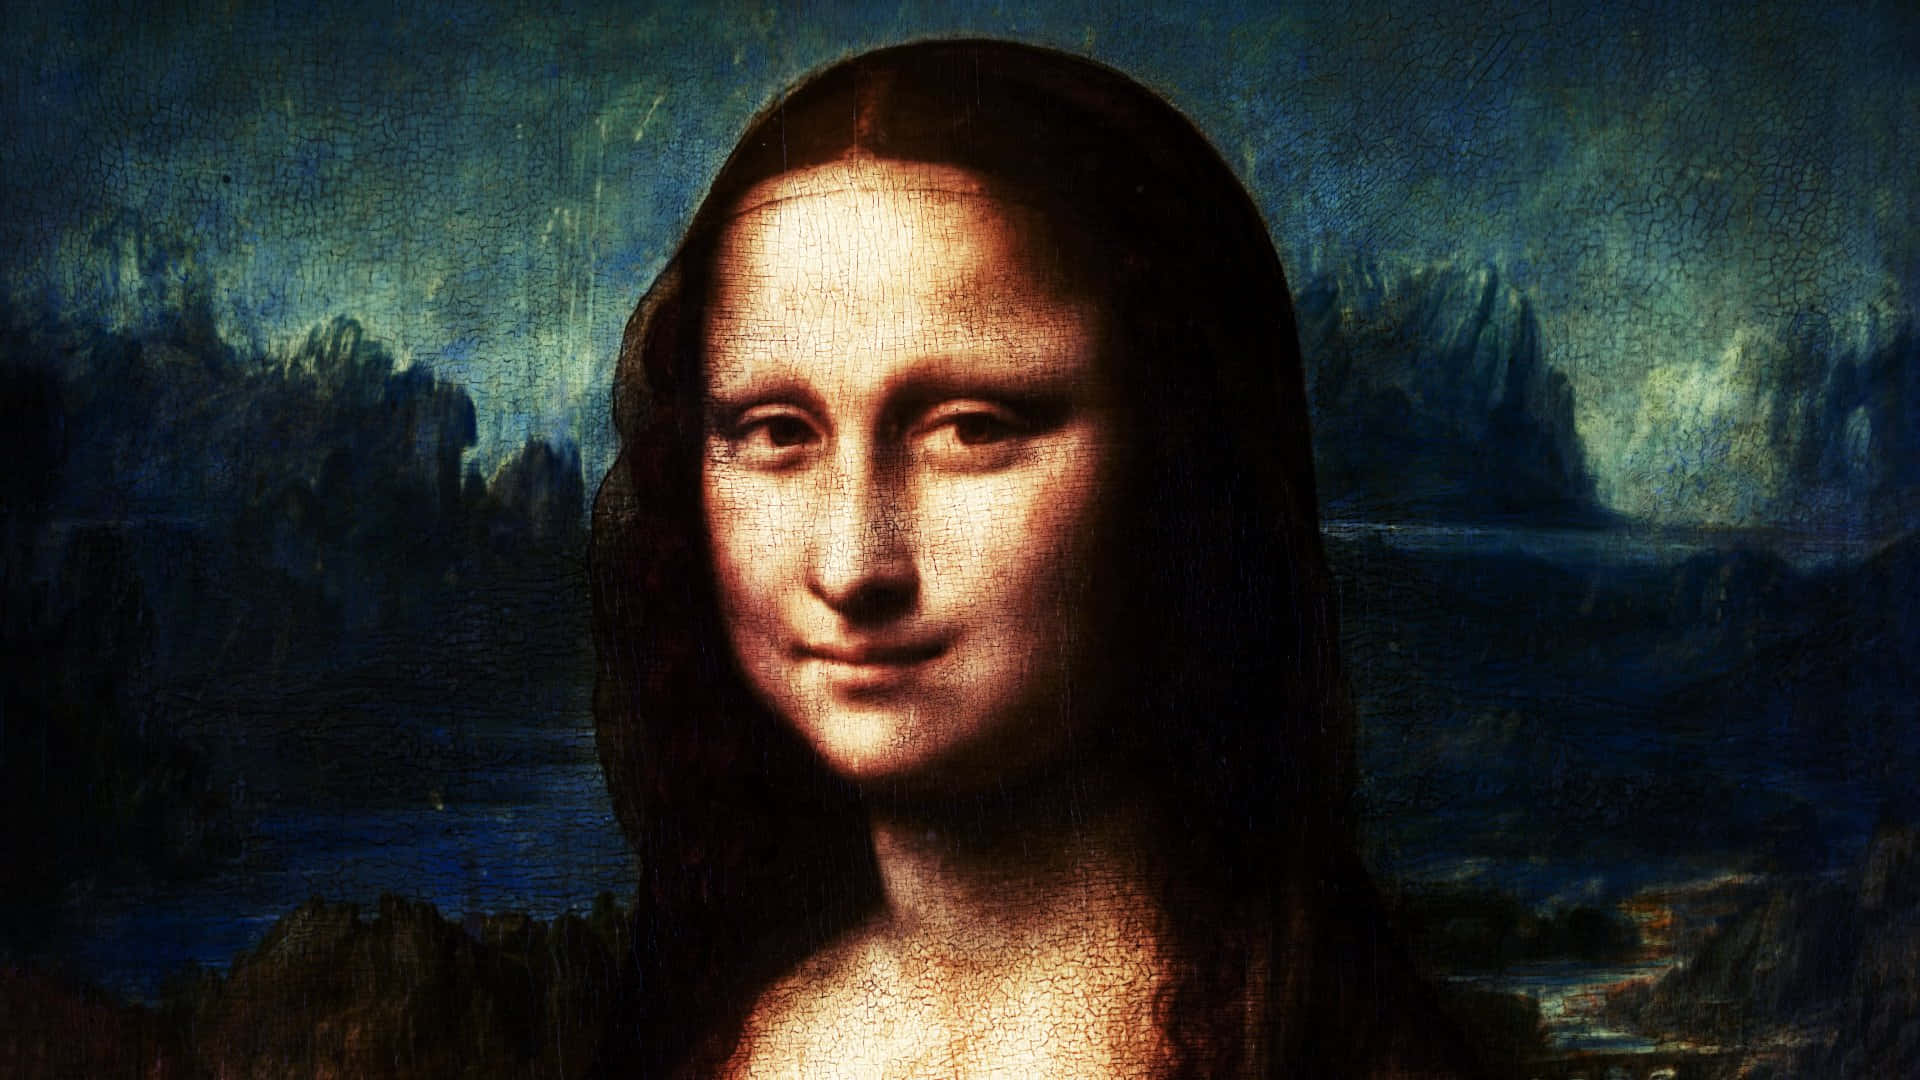 “The Mona Lisa's smile continues to captivate today.”